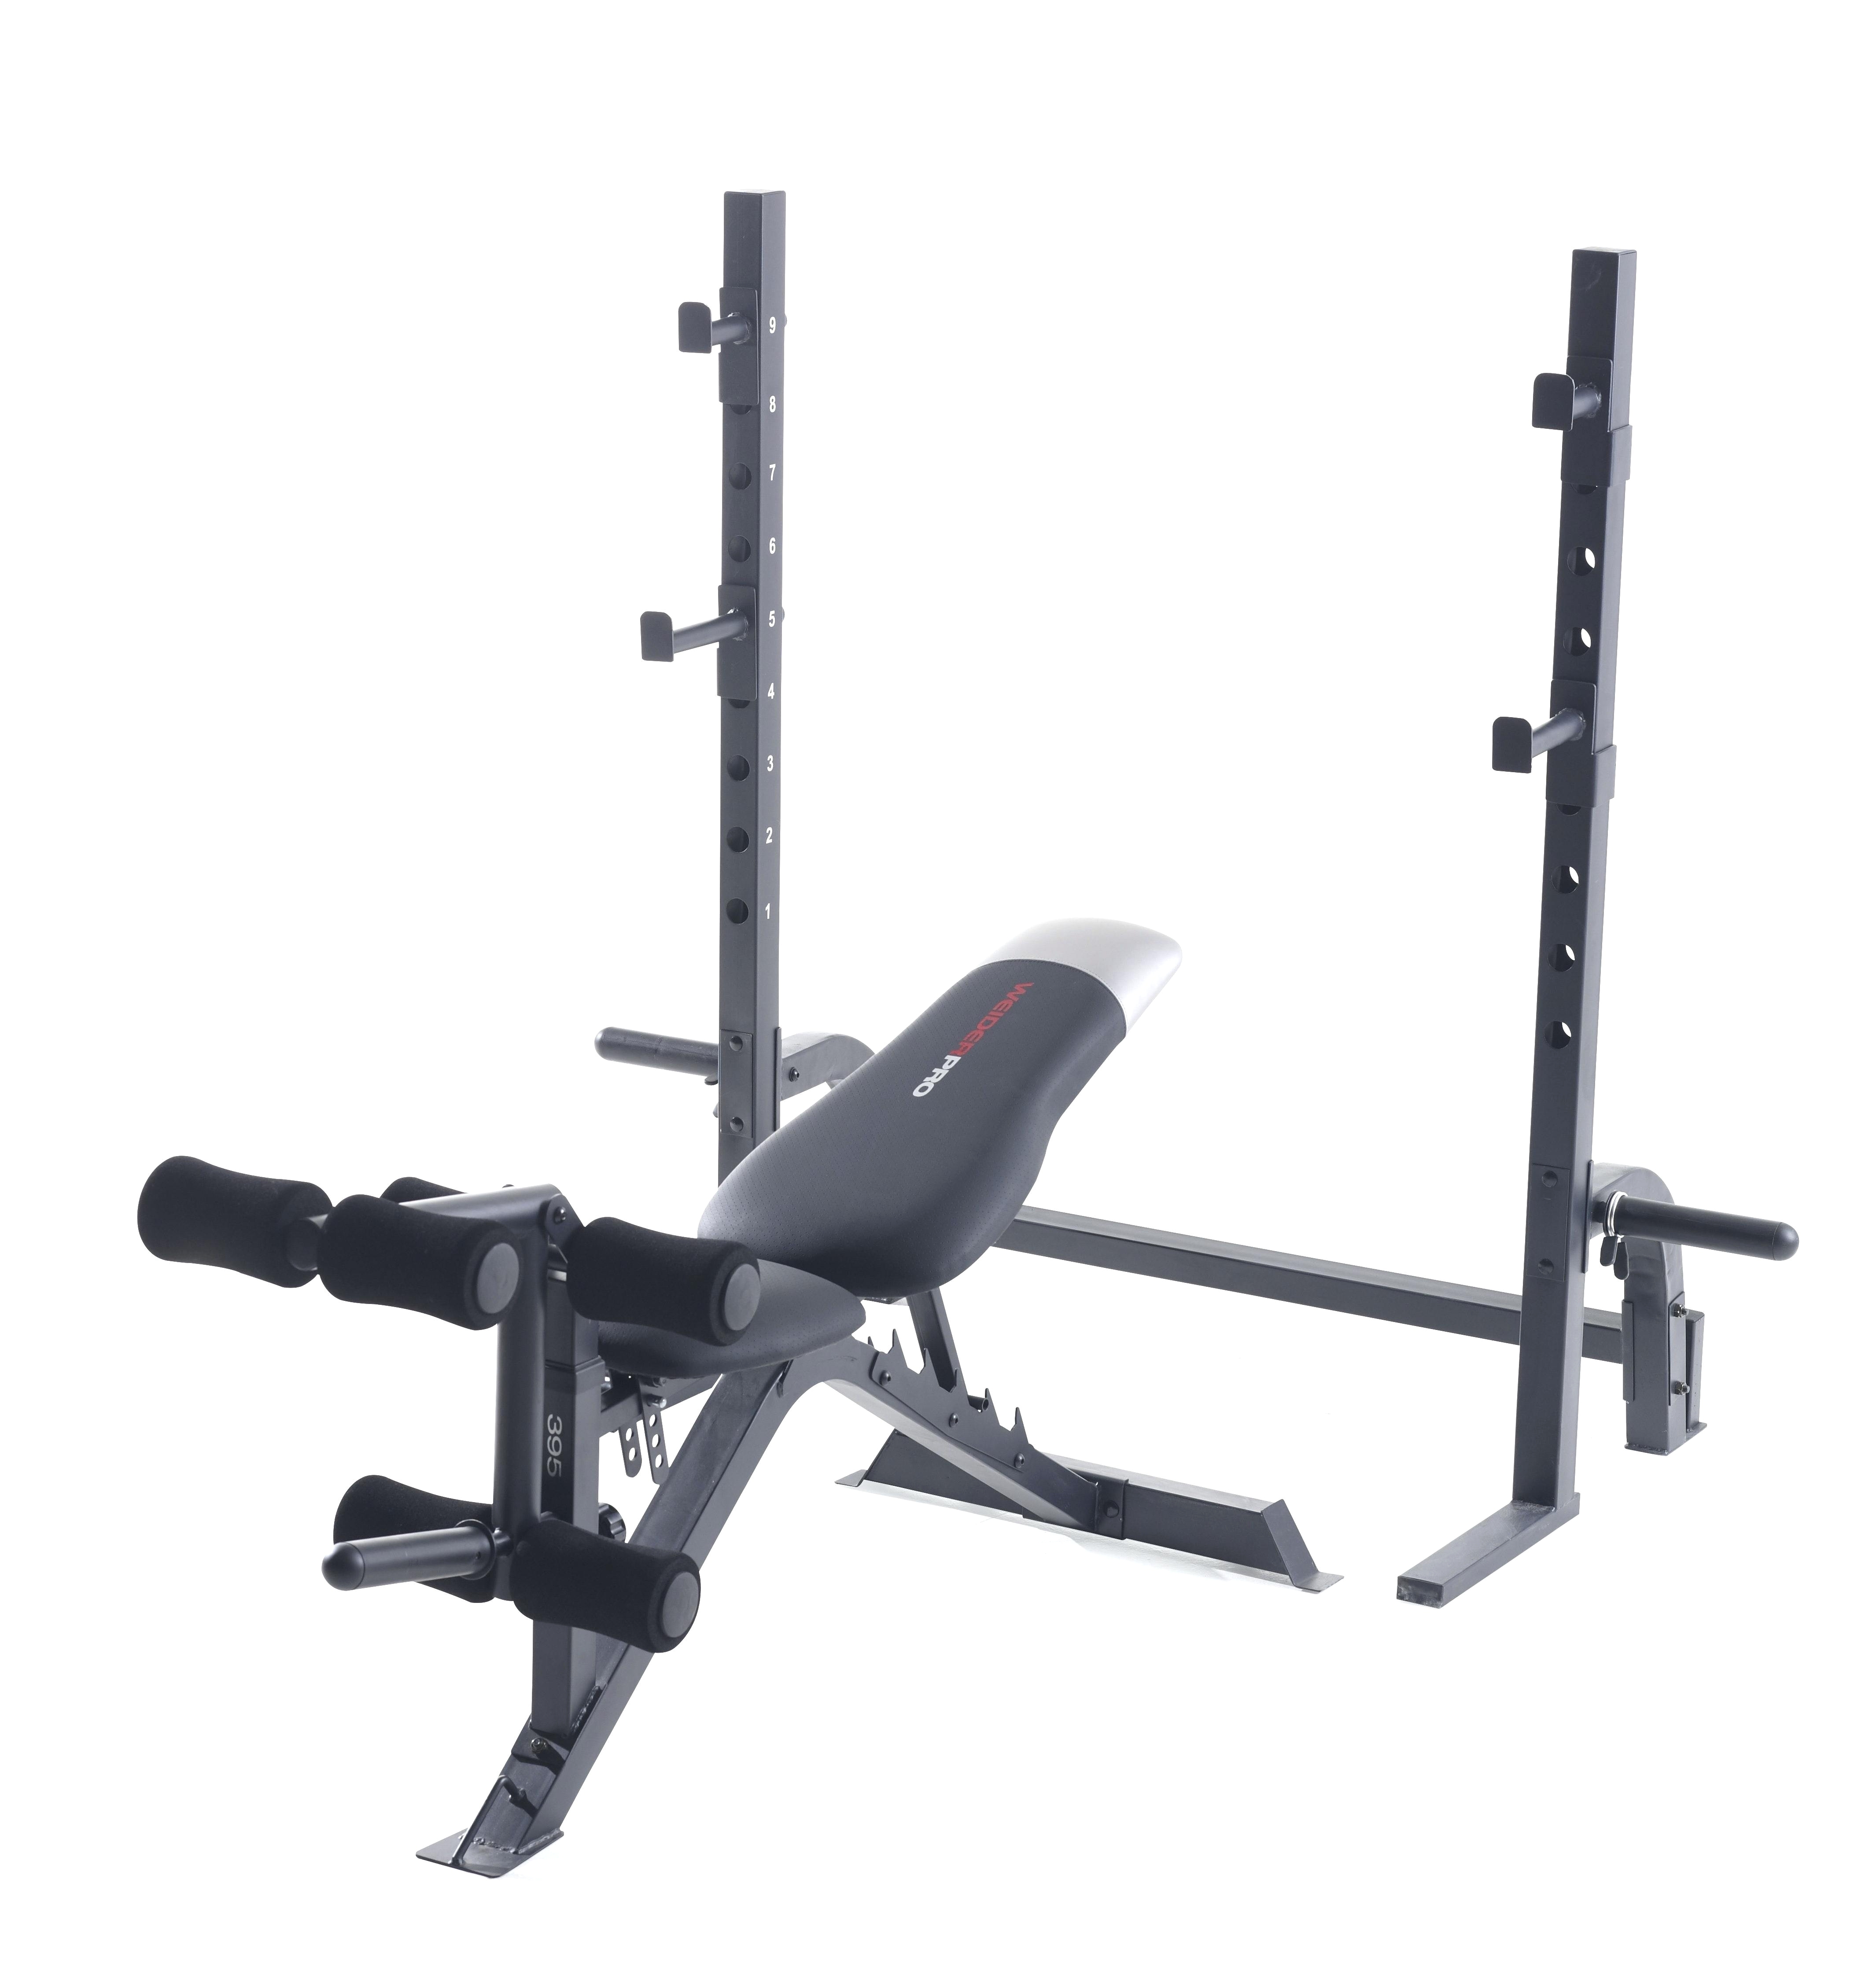 craigslist bench press mariaalcocer com bench press weights for sale